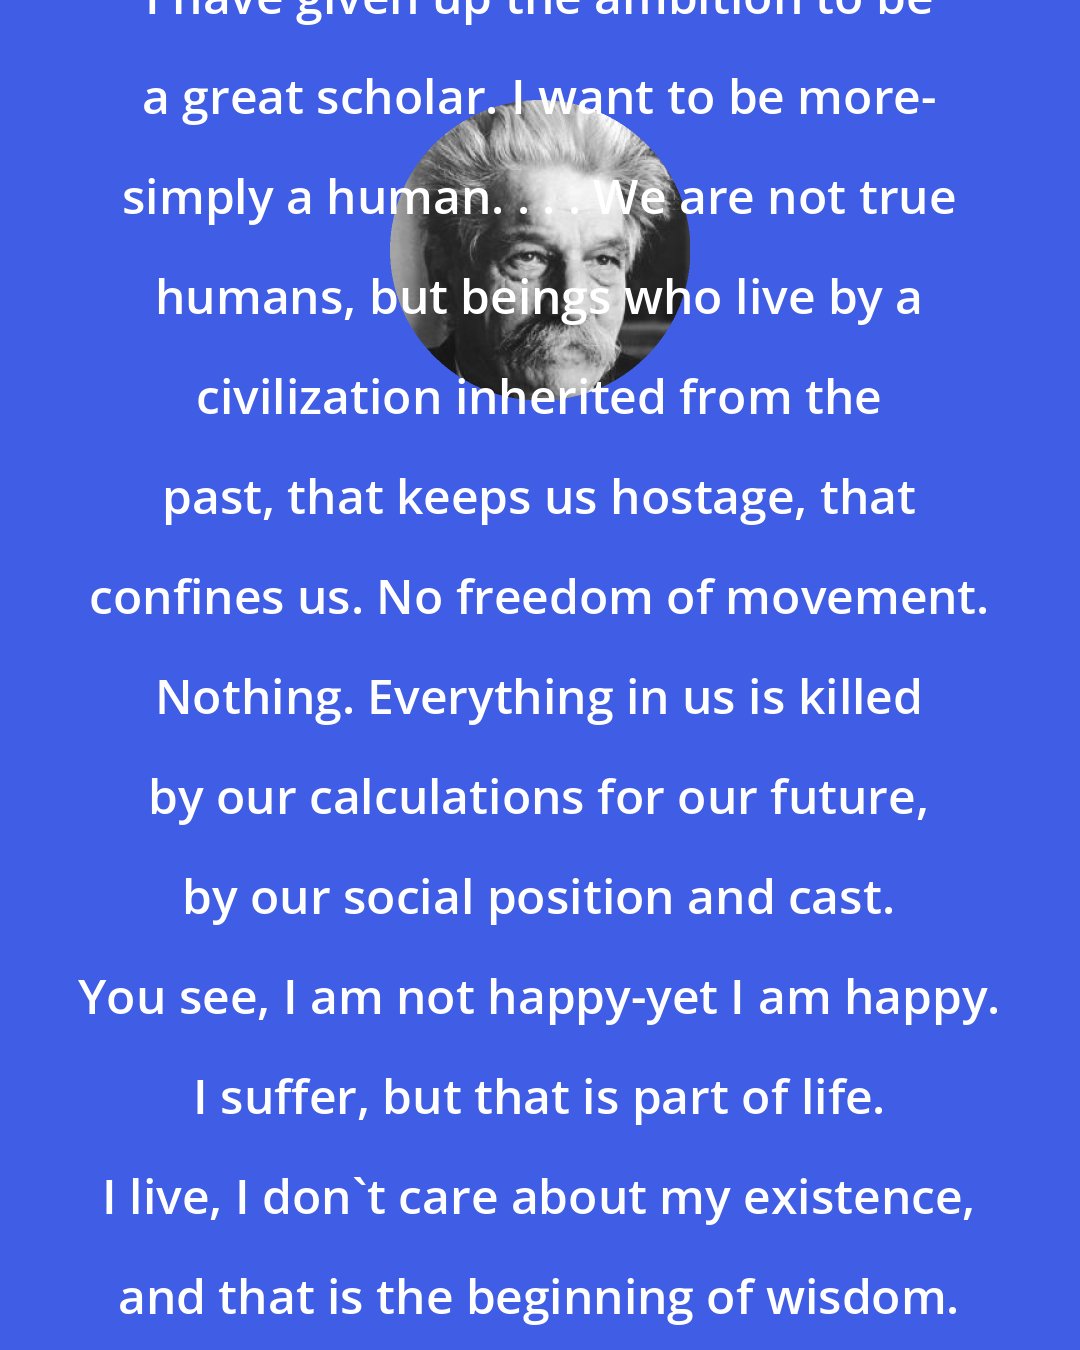 Albert Schweitzer: I have given up the ambition to be a great scholar. I want to be more- simply a human. . . . We are not true humans, but beings who live by a civilization inherited from the past, that keeps us hostage, that confines us. No freedom of movement. Nothing. Everything in us is killed by our calculations for our future, by our social position and cast. You see, I am not happy-yet I am happy. I suffer, but that is part of life. I live, I don't care about my existence, and that is the beginning of wisdom.